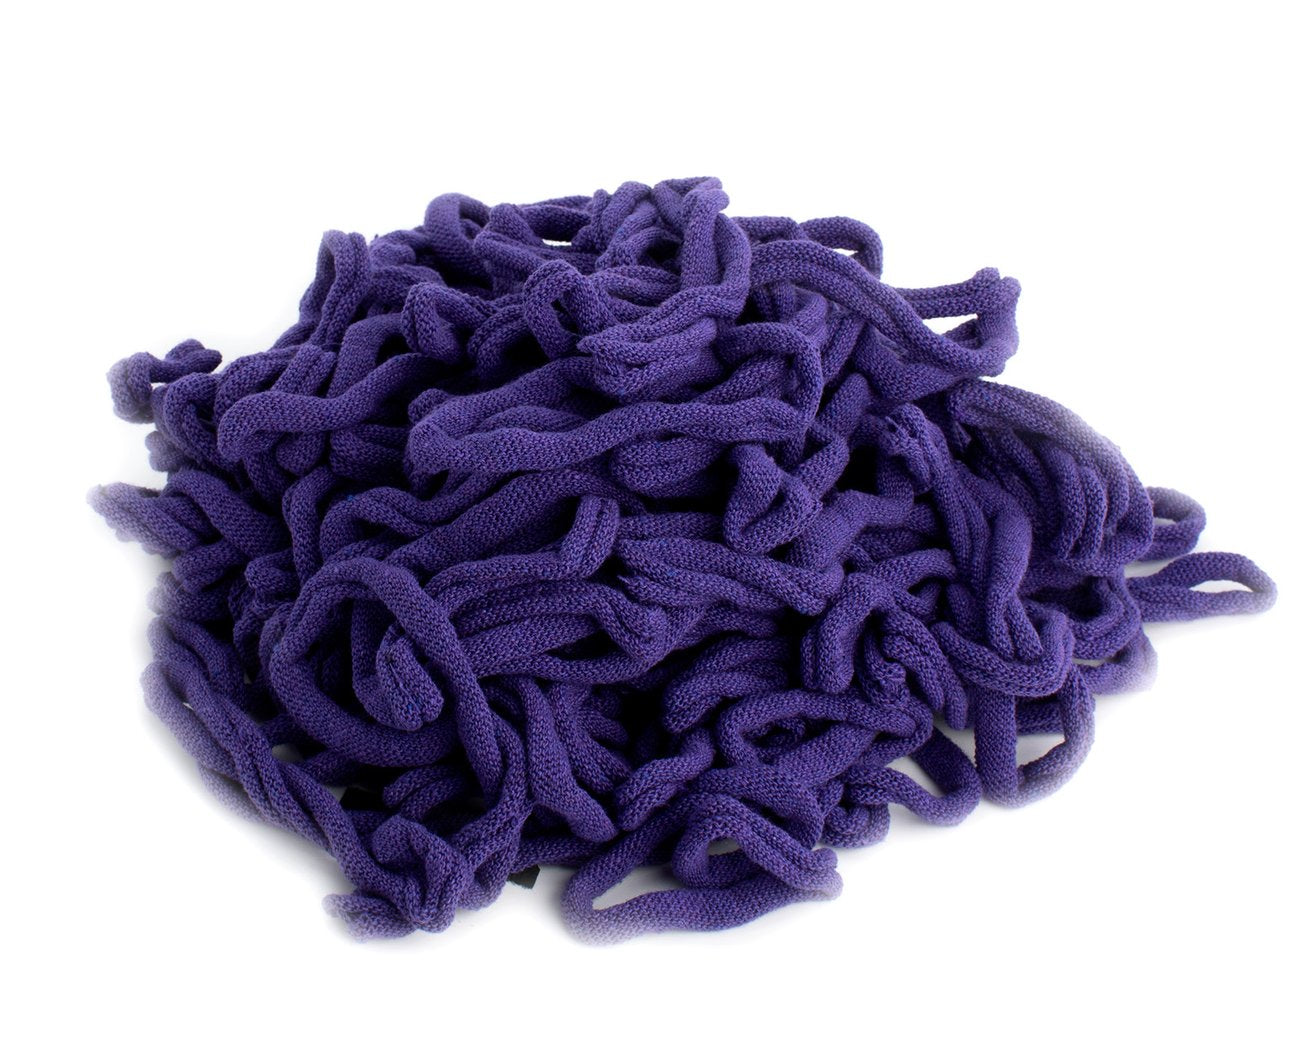 Folk Toys 1 Pound of Cotton Loops for Wooden Weaving Looper Loom